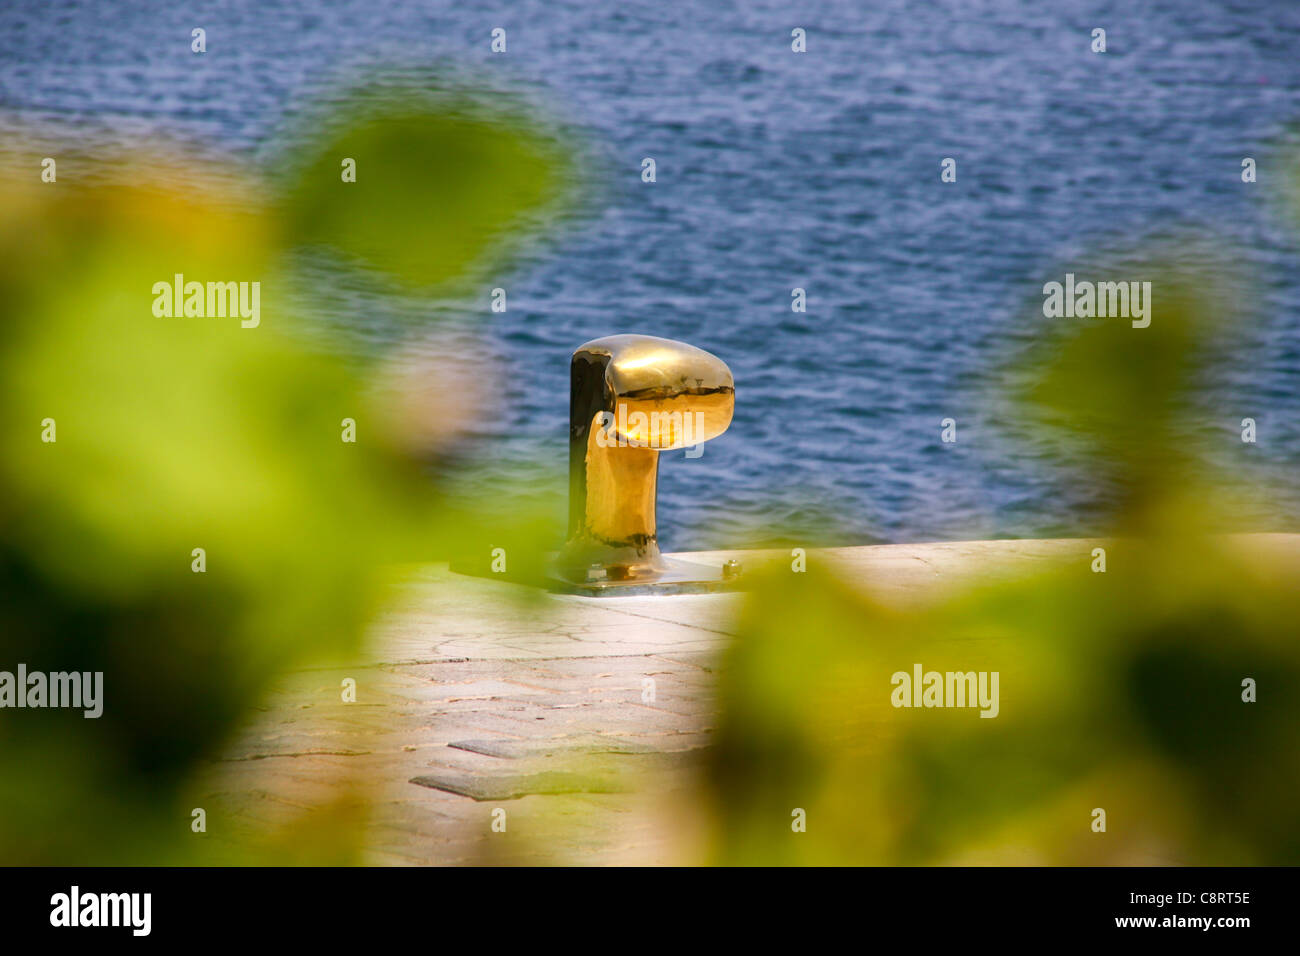 Gold coloured tie up bollard on harbourside jetty Stock Photo